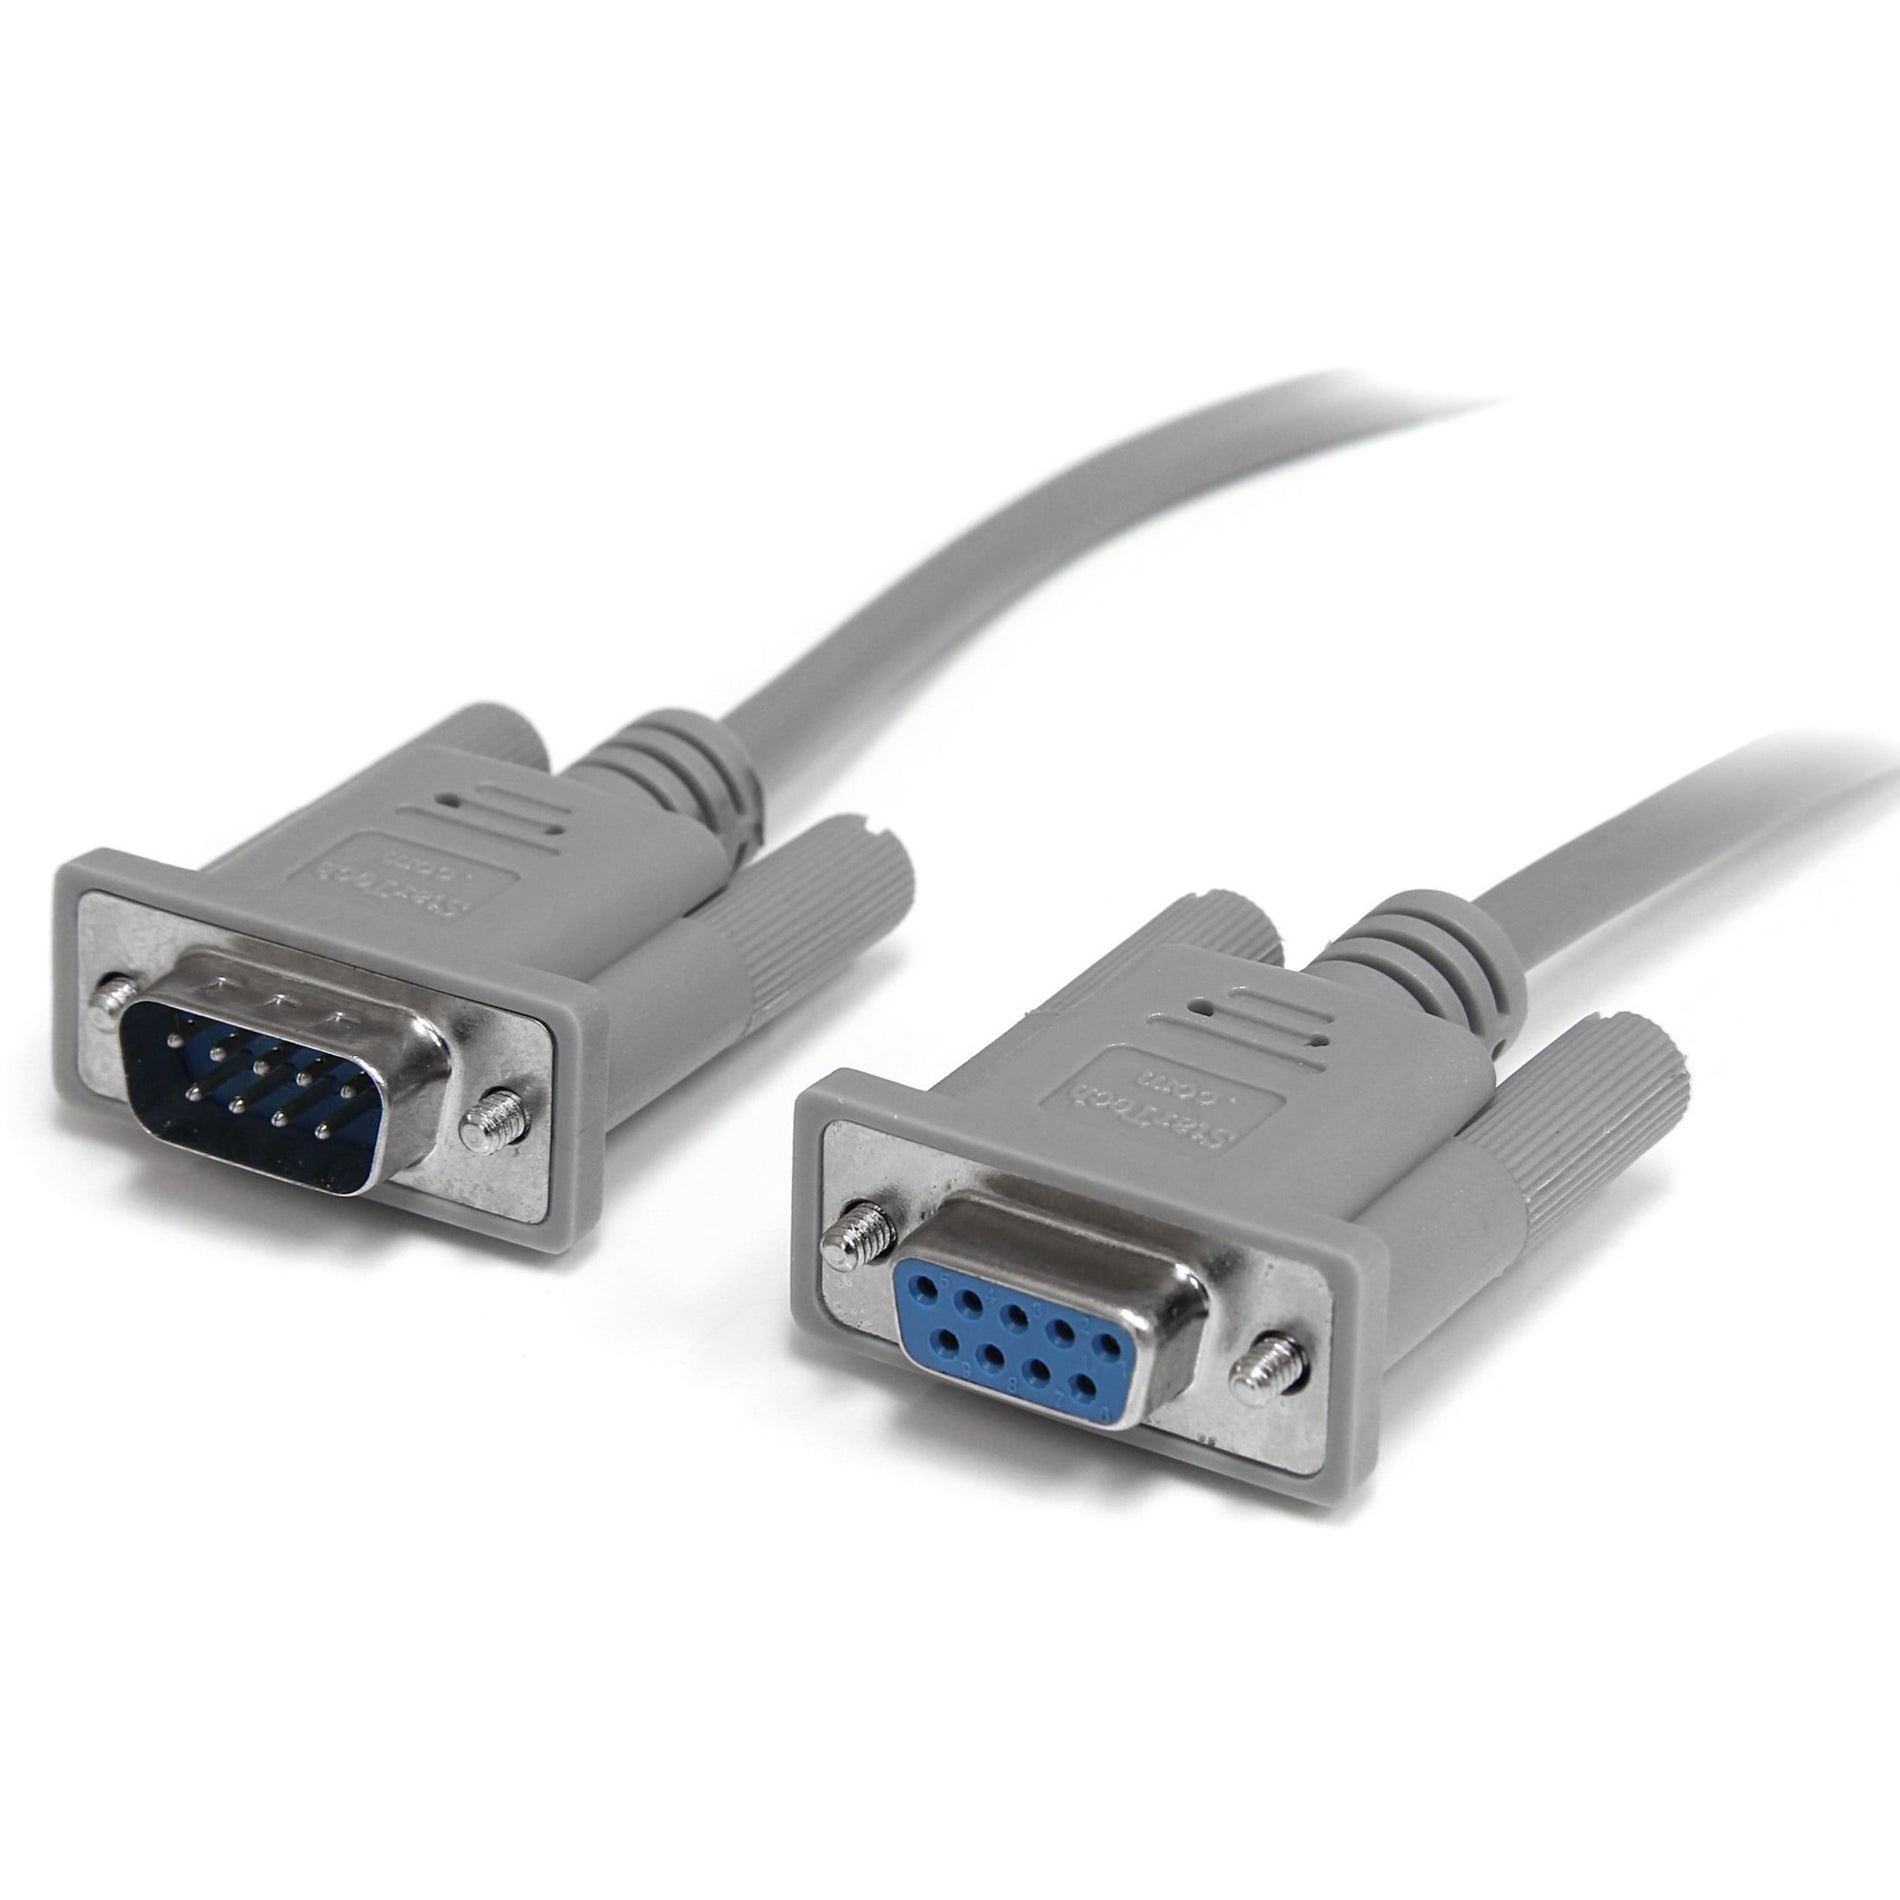 StarTech.com SCNM9FM Serial Null Modem Cable, 10 ft. Cross Wired, DB9 F/M